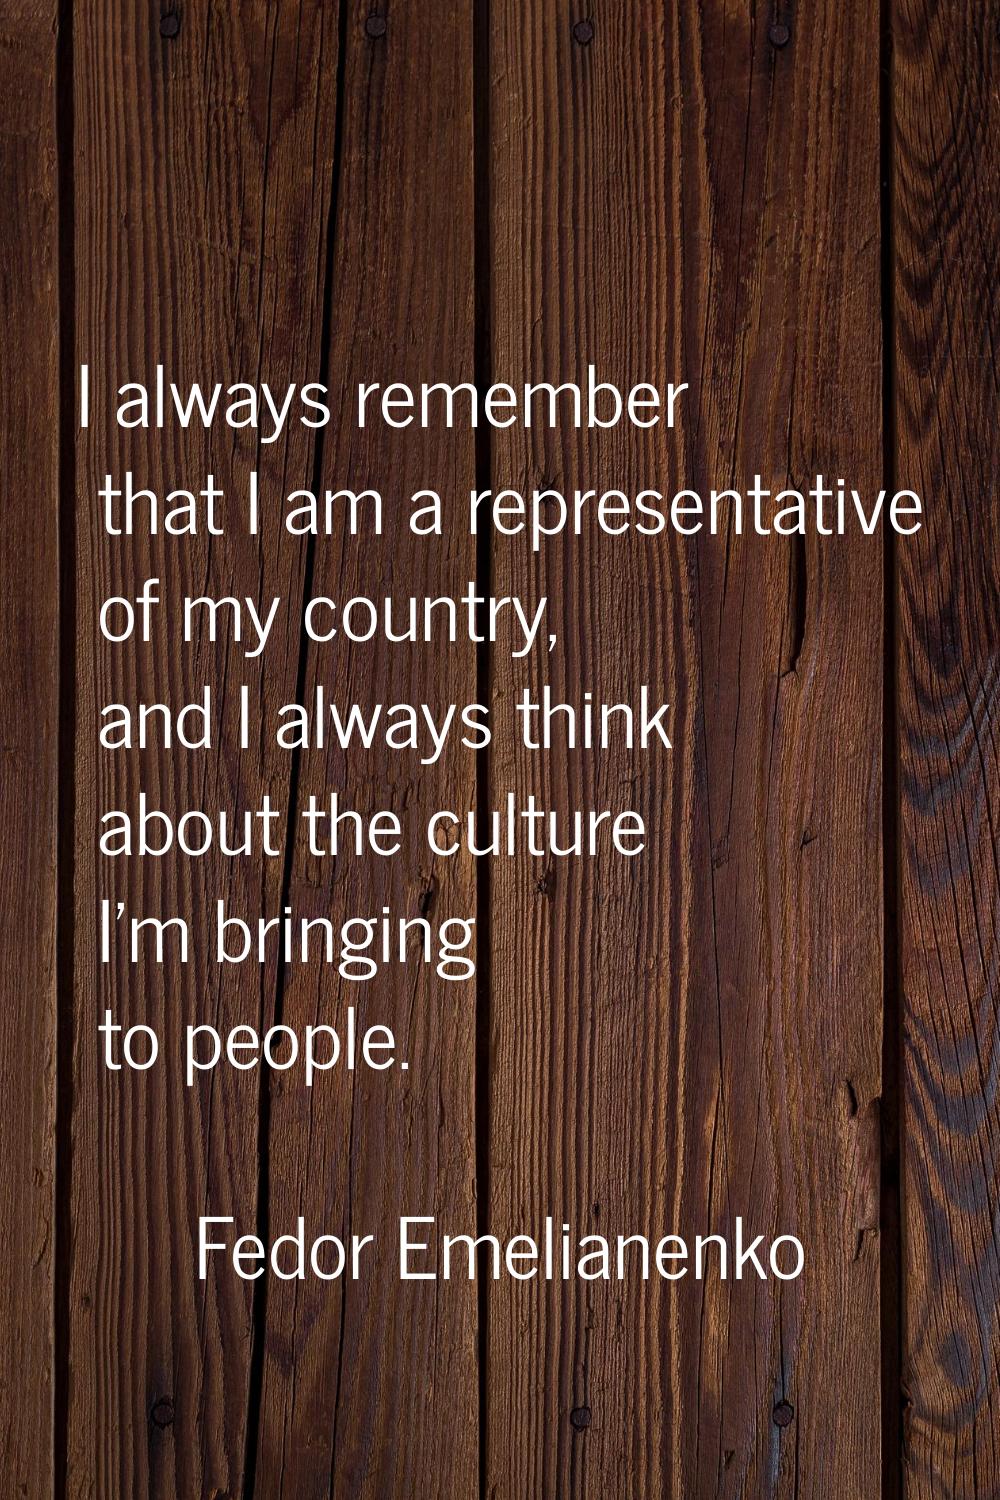 I always remember that I am a representative of my country, and I always think about the culture I'